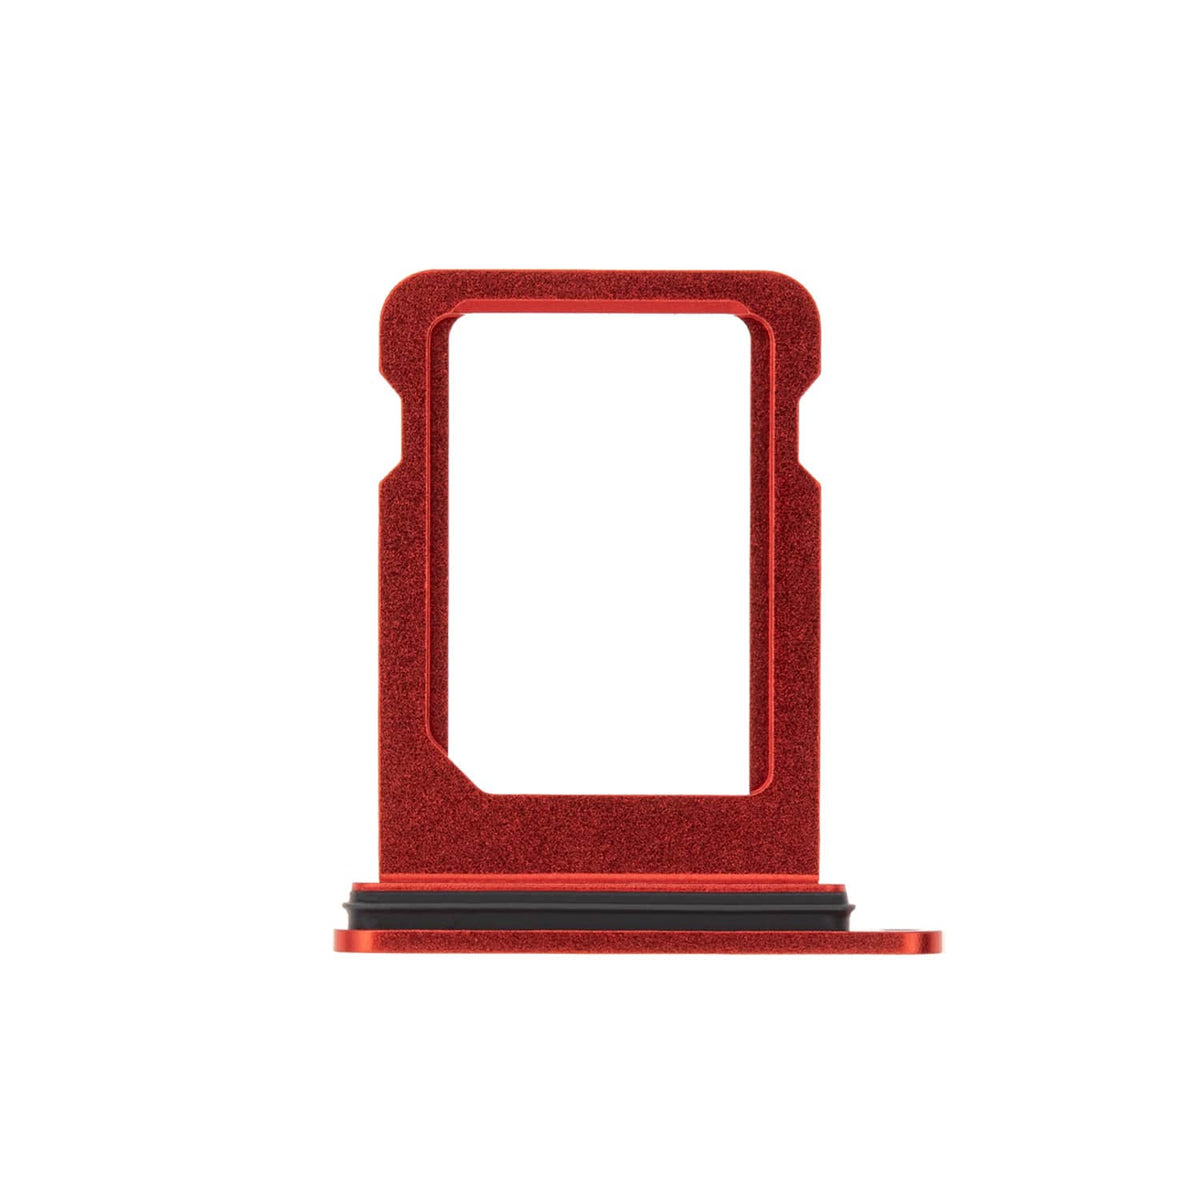 SIM CARD TRAY FOR IPHONE 12 MINI - RED